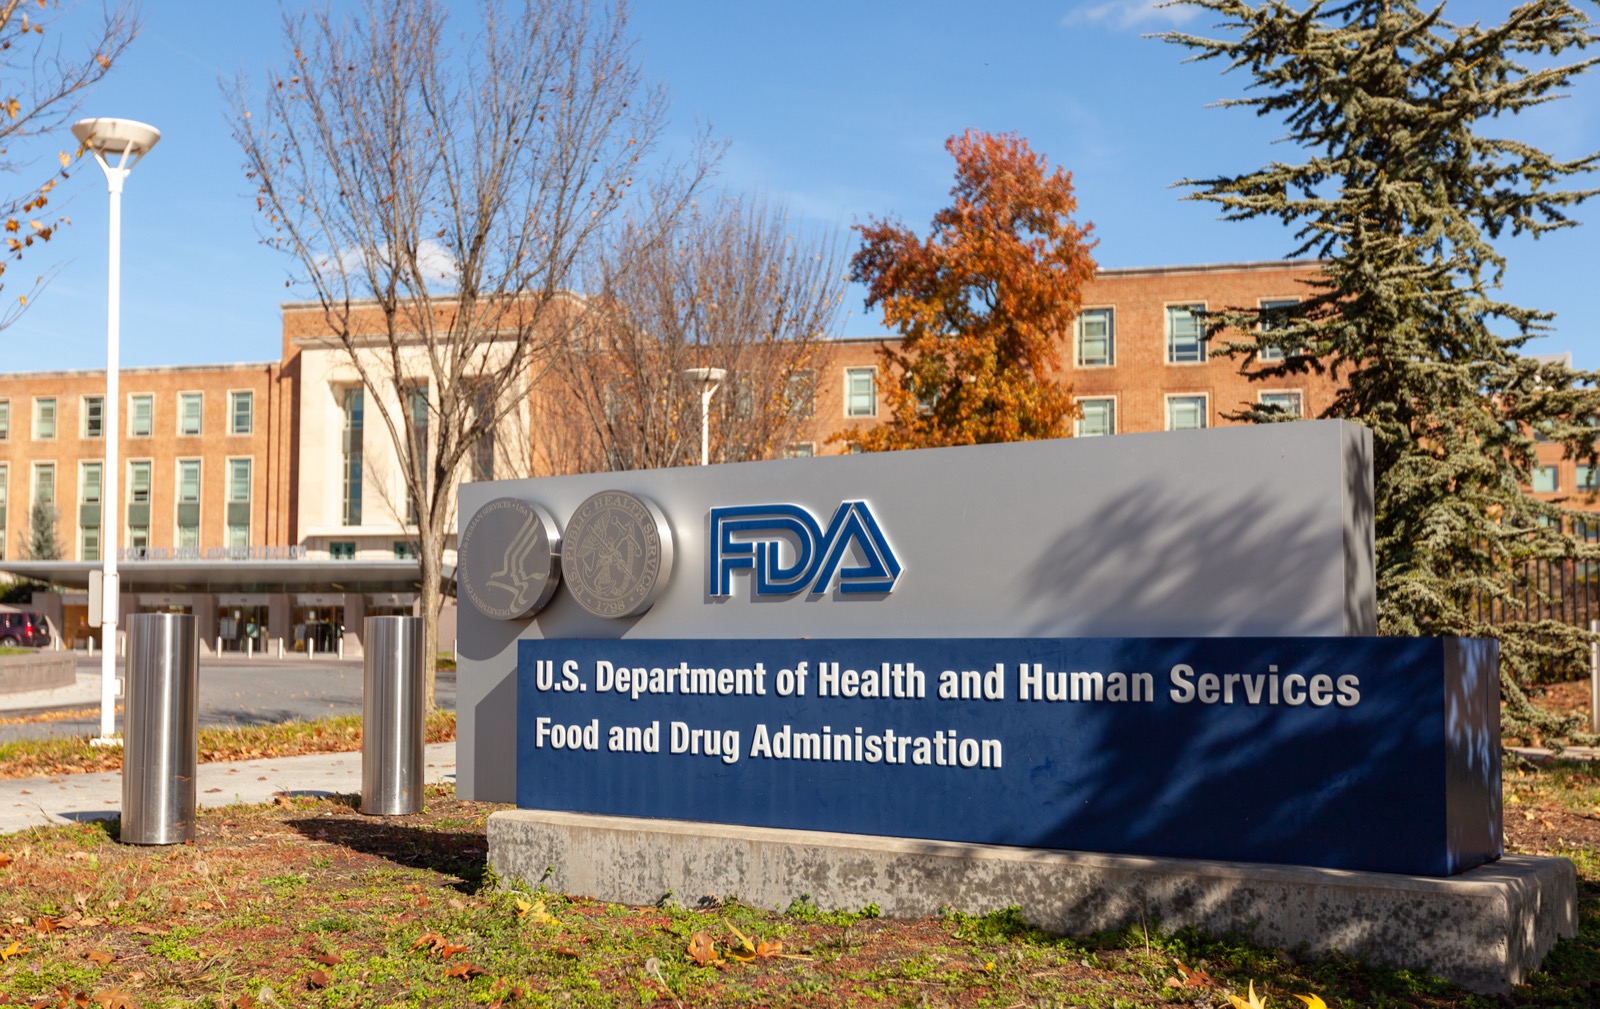 outside the main fda building, the sign is in the foreground